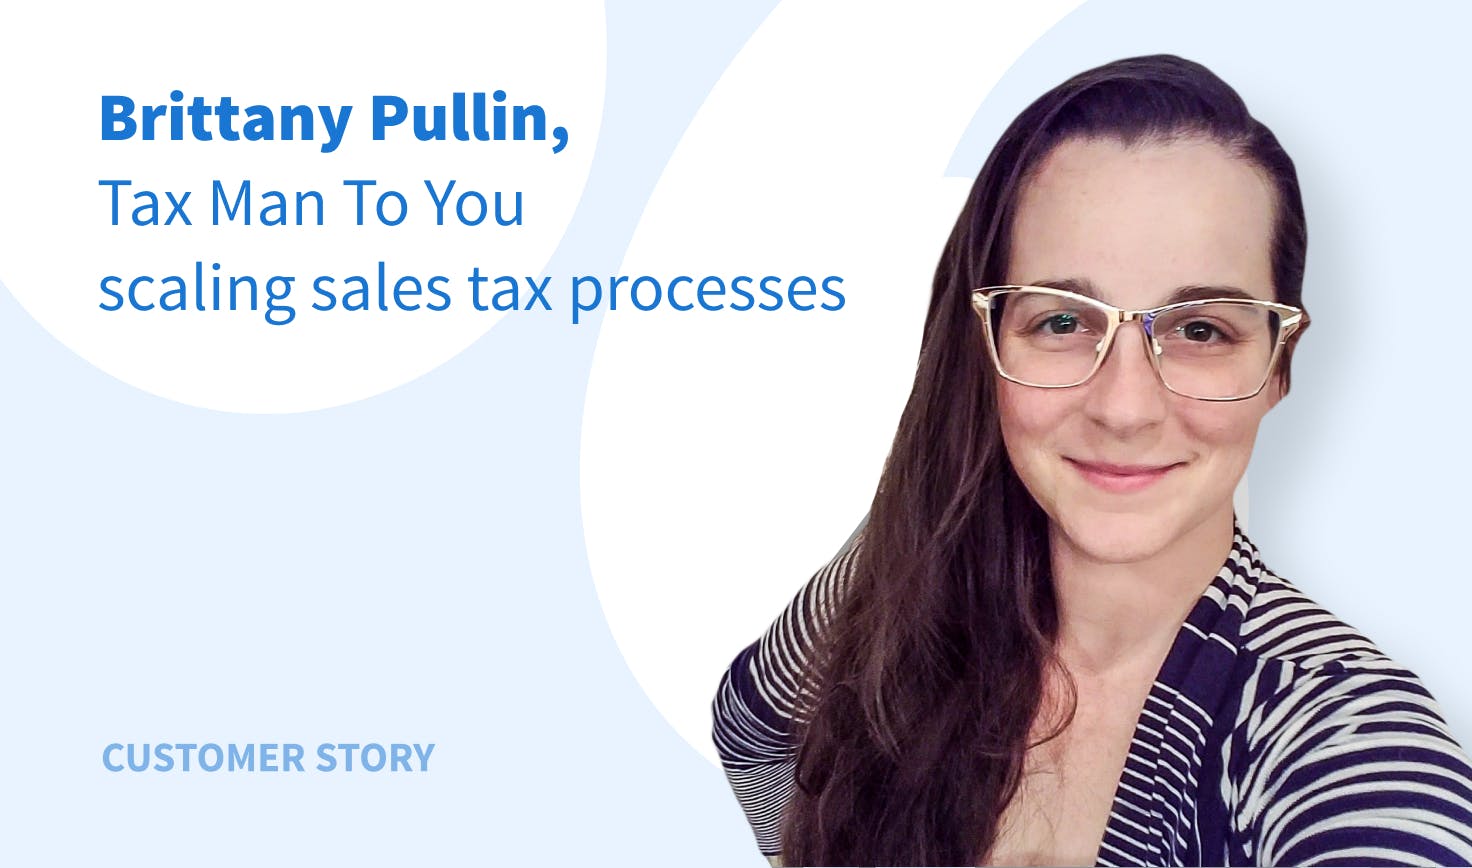 Tax Man To You Experience: Scaling a Sales Tax Business 2x